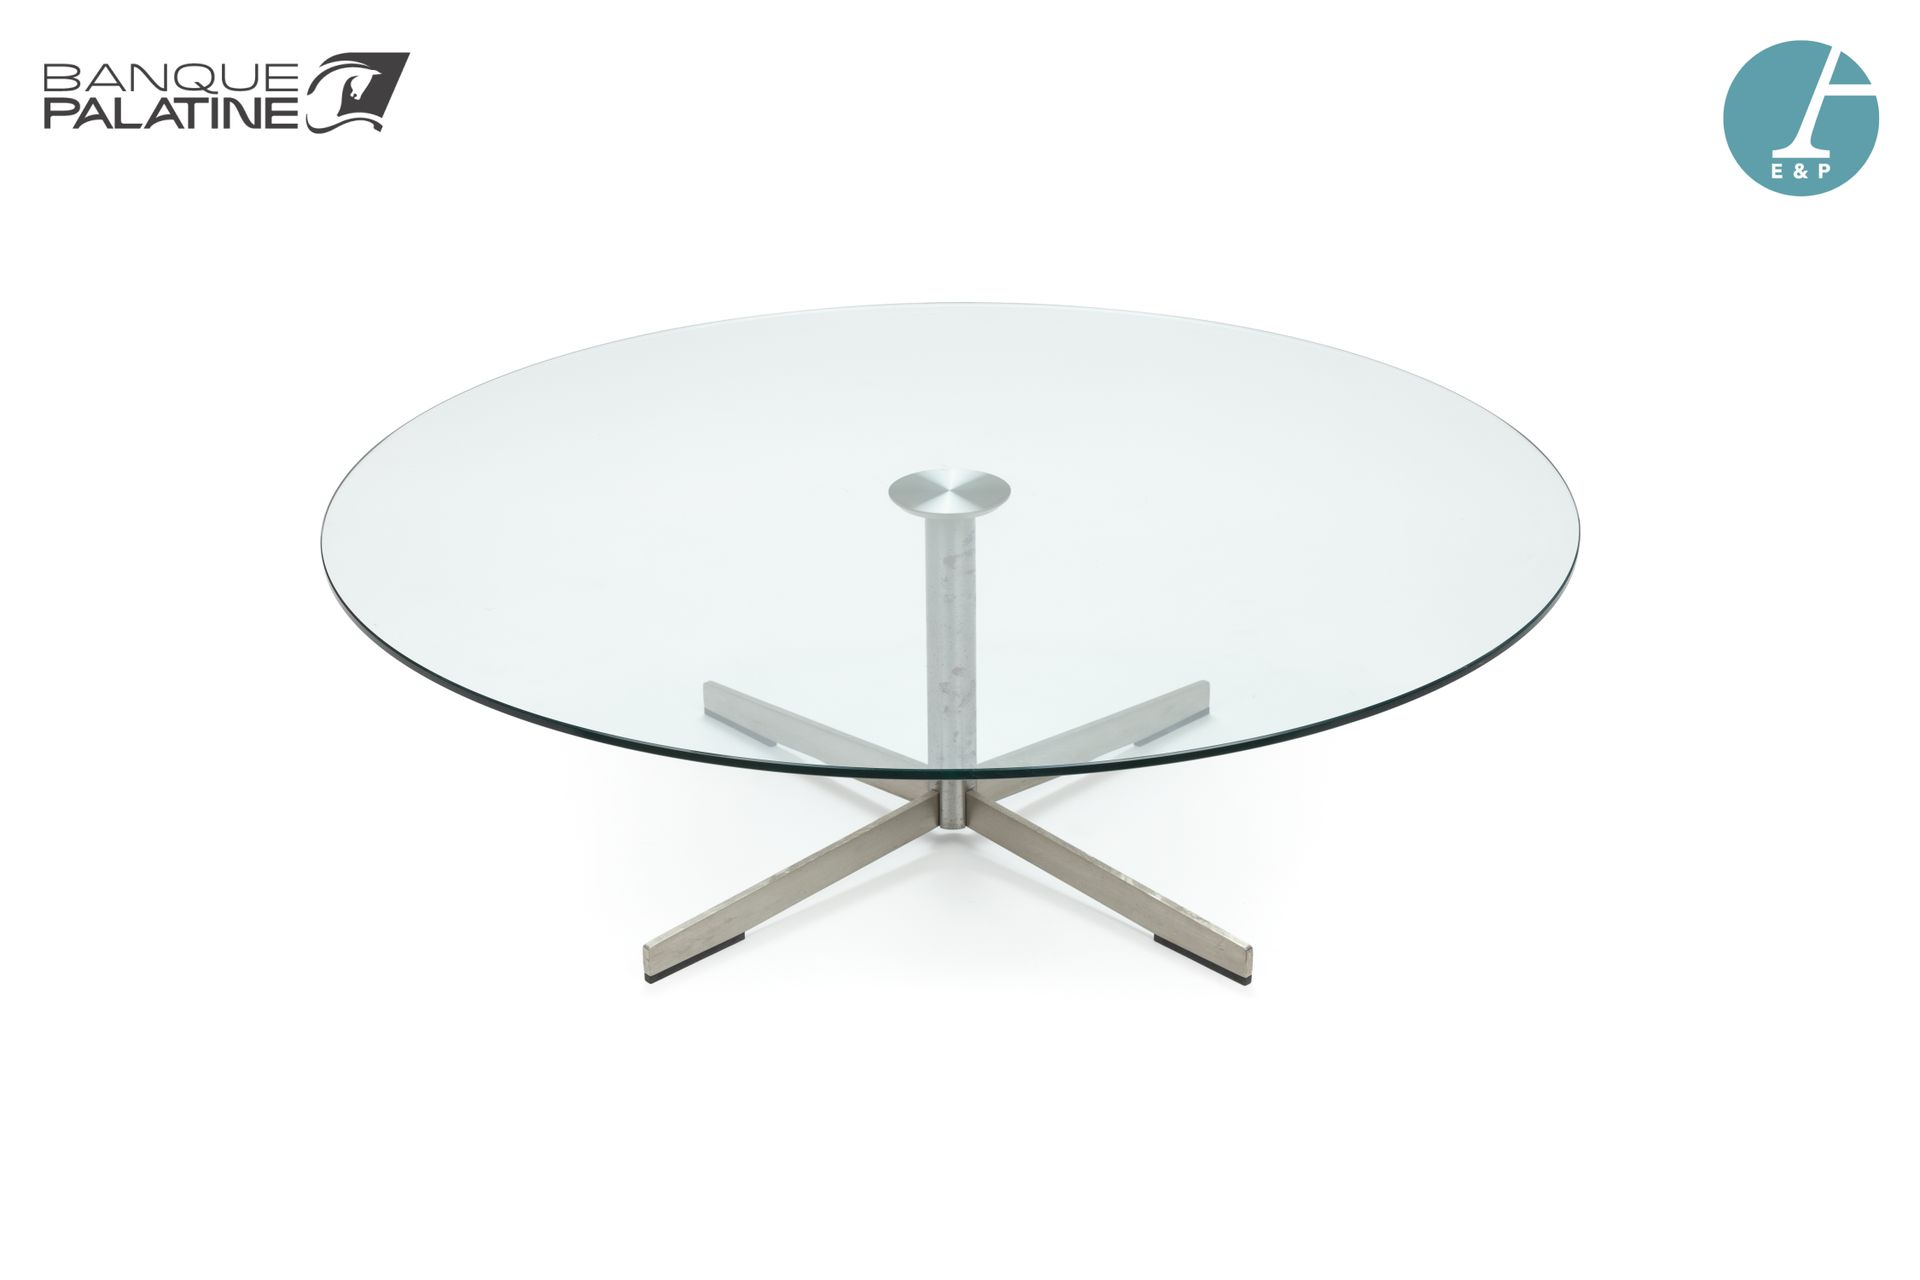 Null Coffee table, glass top and metal base

H: 50cm - Diameter: 100cm